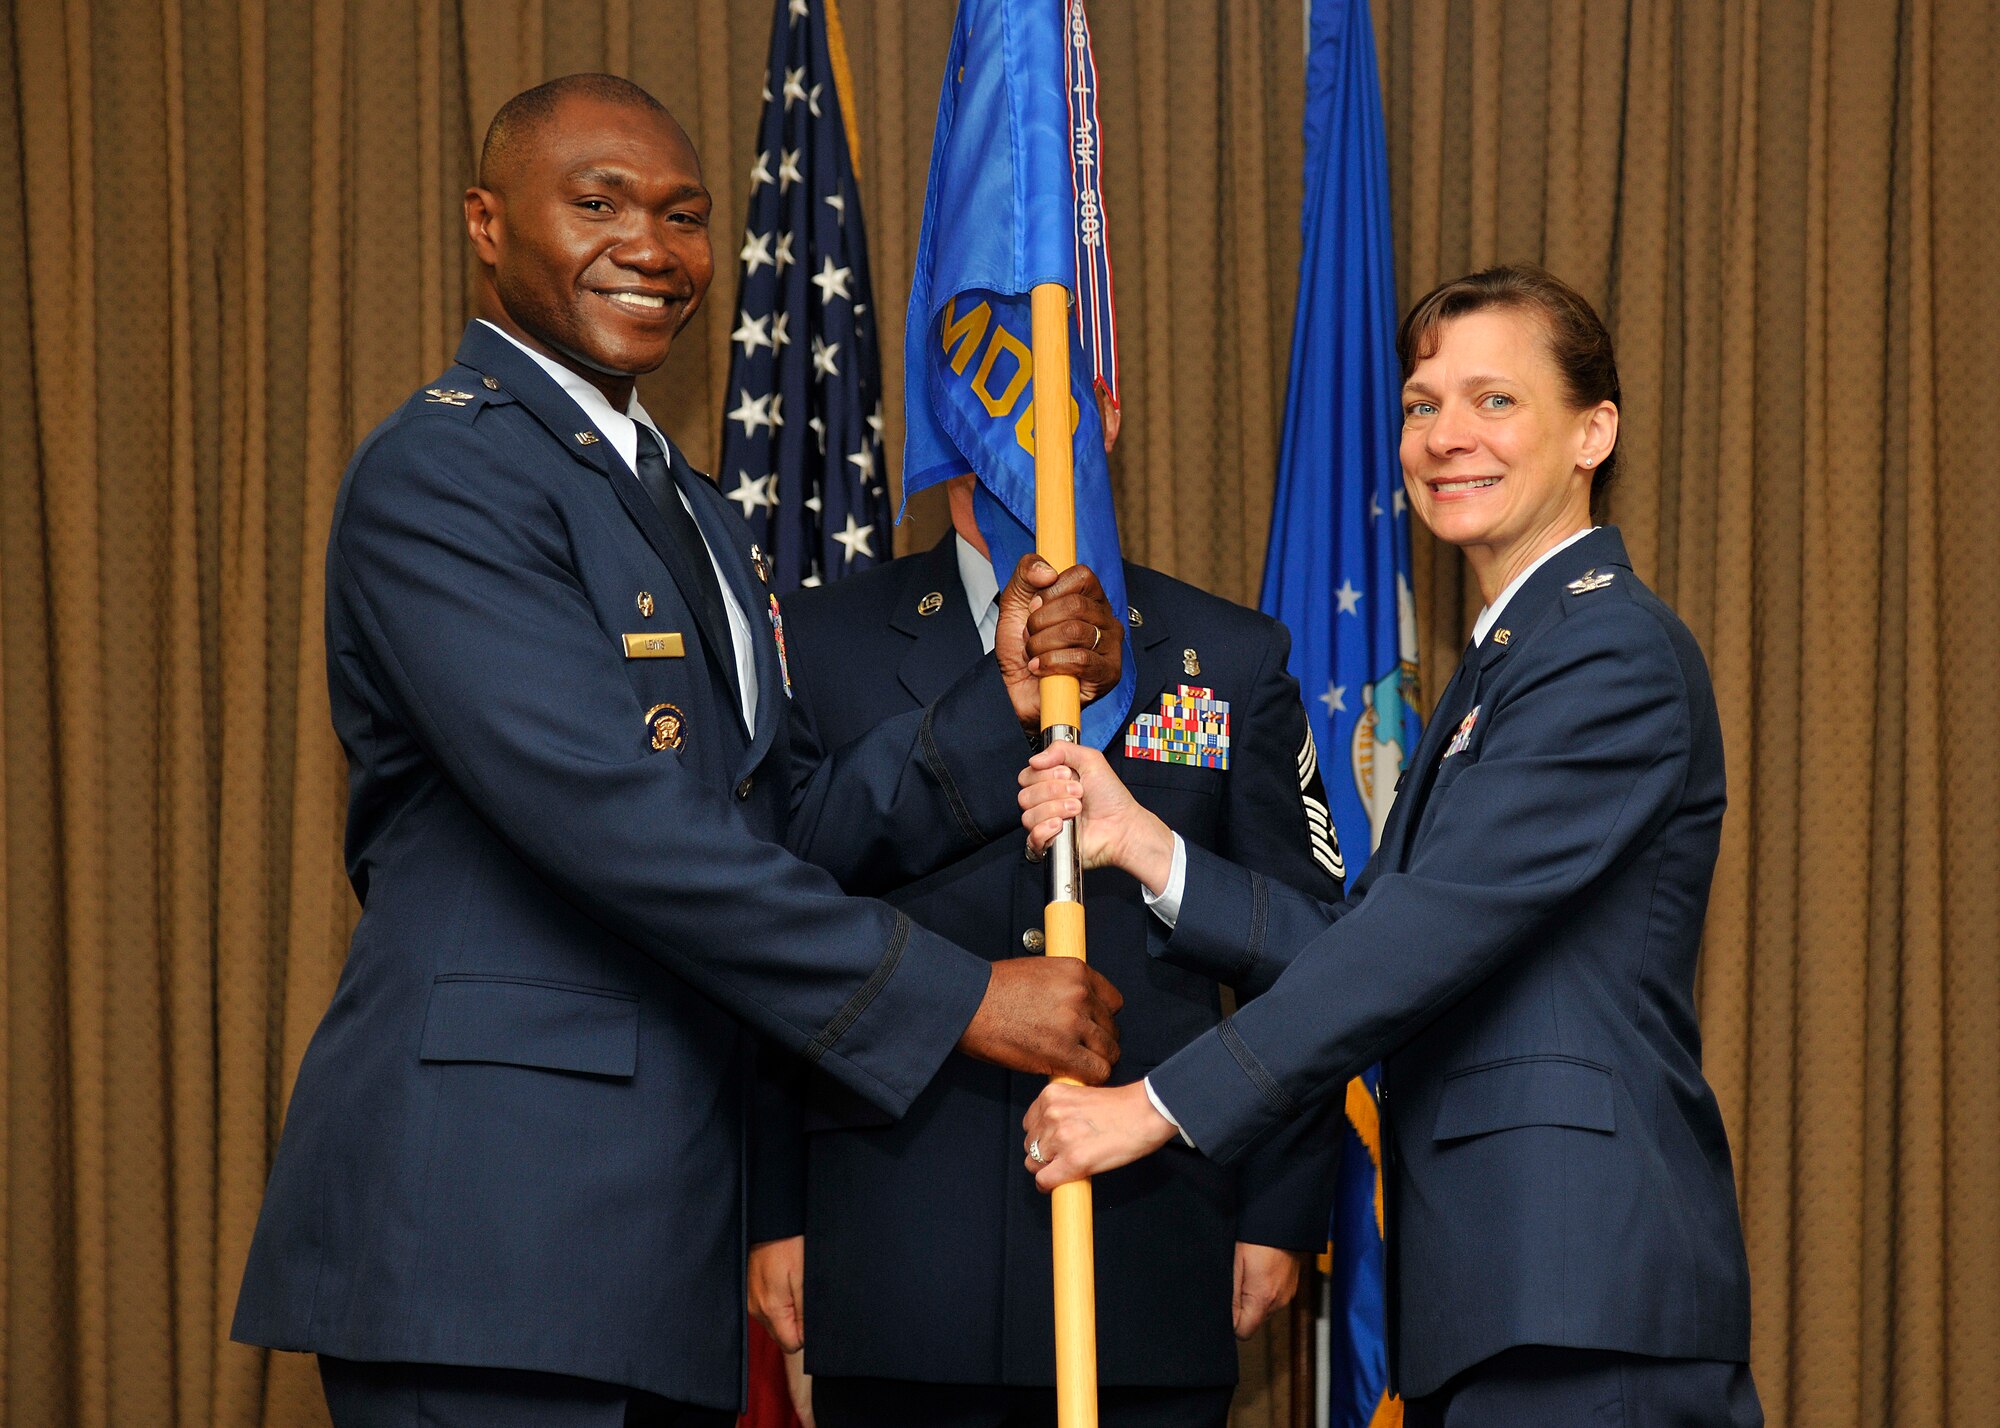 Col. Rodney Lewis, 319th Air Base Wing commander, hands the 319th Medical Group guidon to Col. Therese Bohusch, the new 319th MDG commander, during a change of command ceremony on Grand Forks Air Force Base, N.D., July 24, 2015. Bohusch assumed command from Col. Terri Bailey. (U.S. Air Force photo by Senior Airman Xavier Navarro/released)